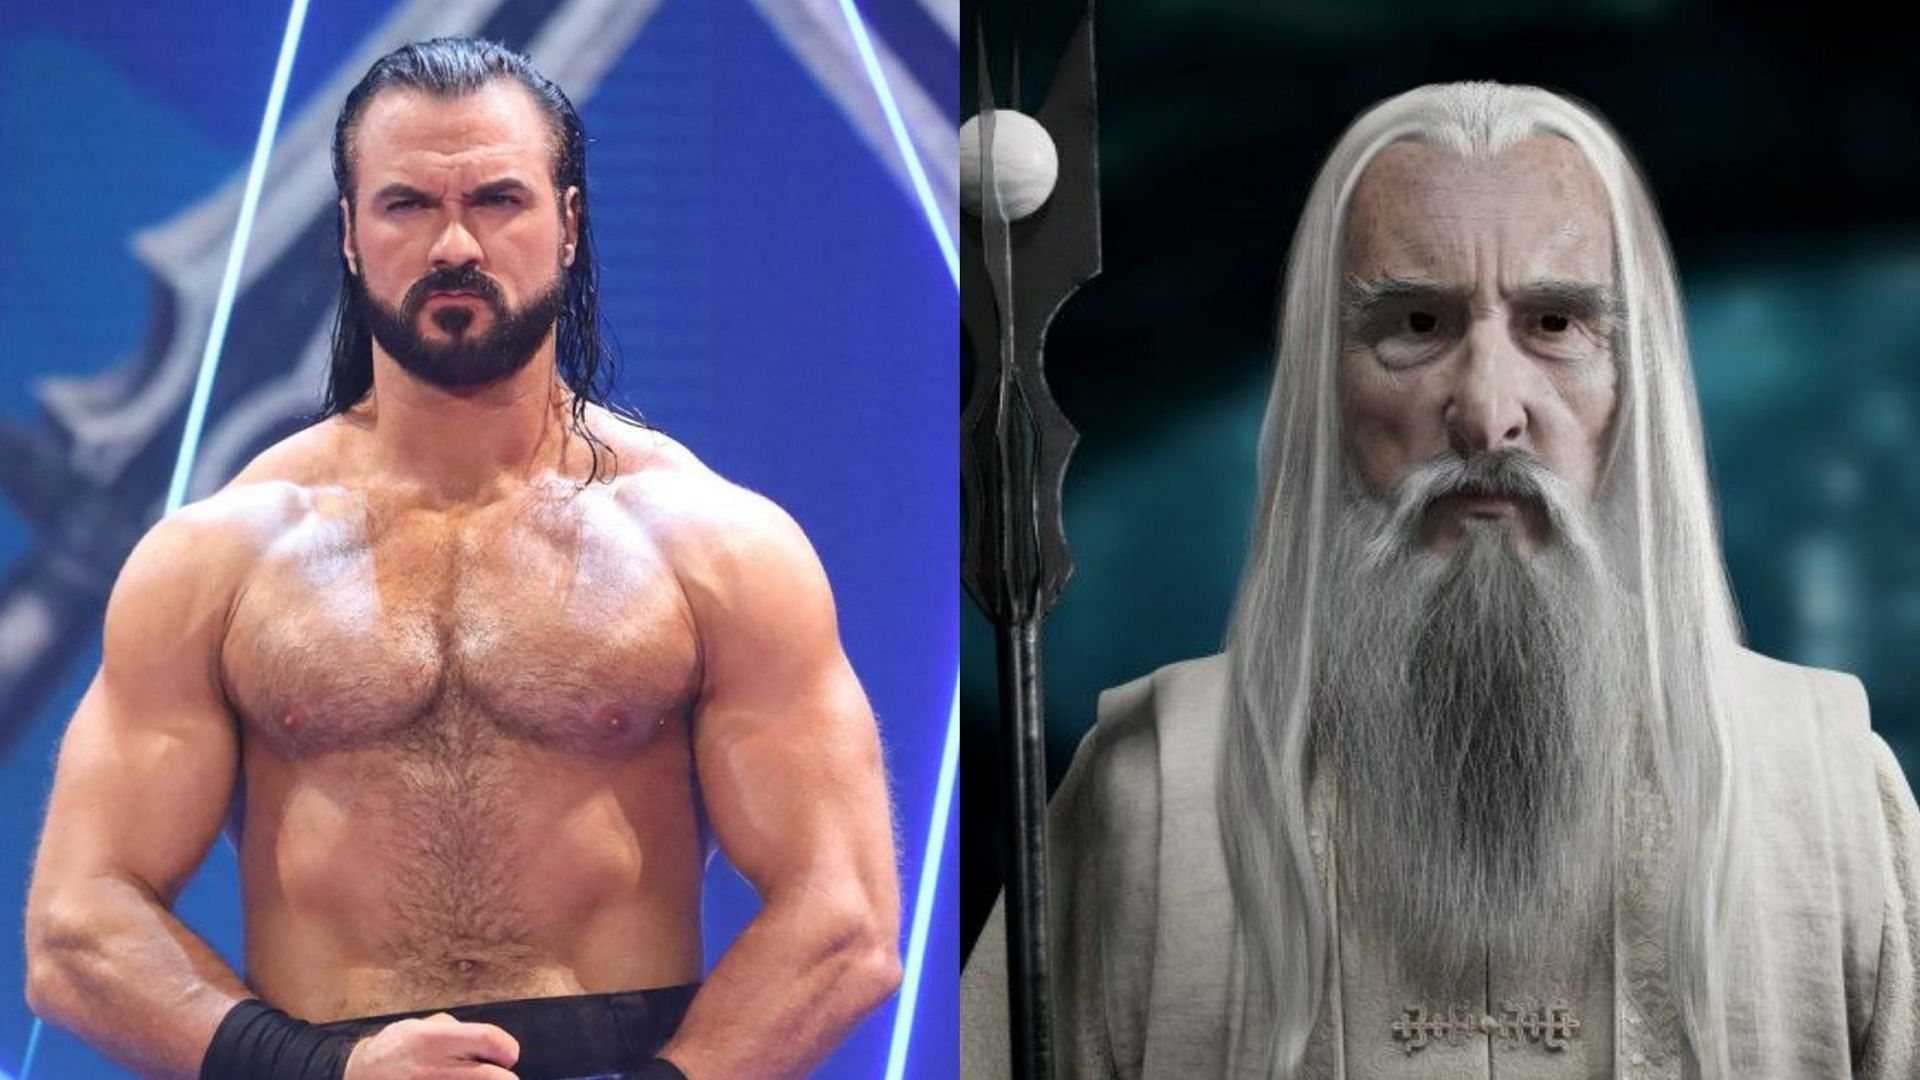 Fantasy Lord of The Rings casting for WWE fans?